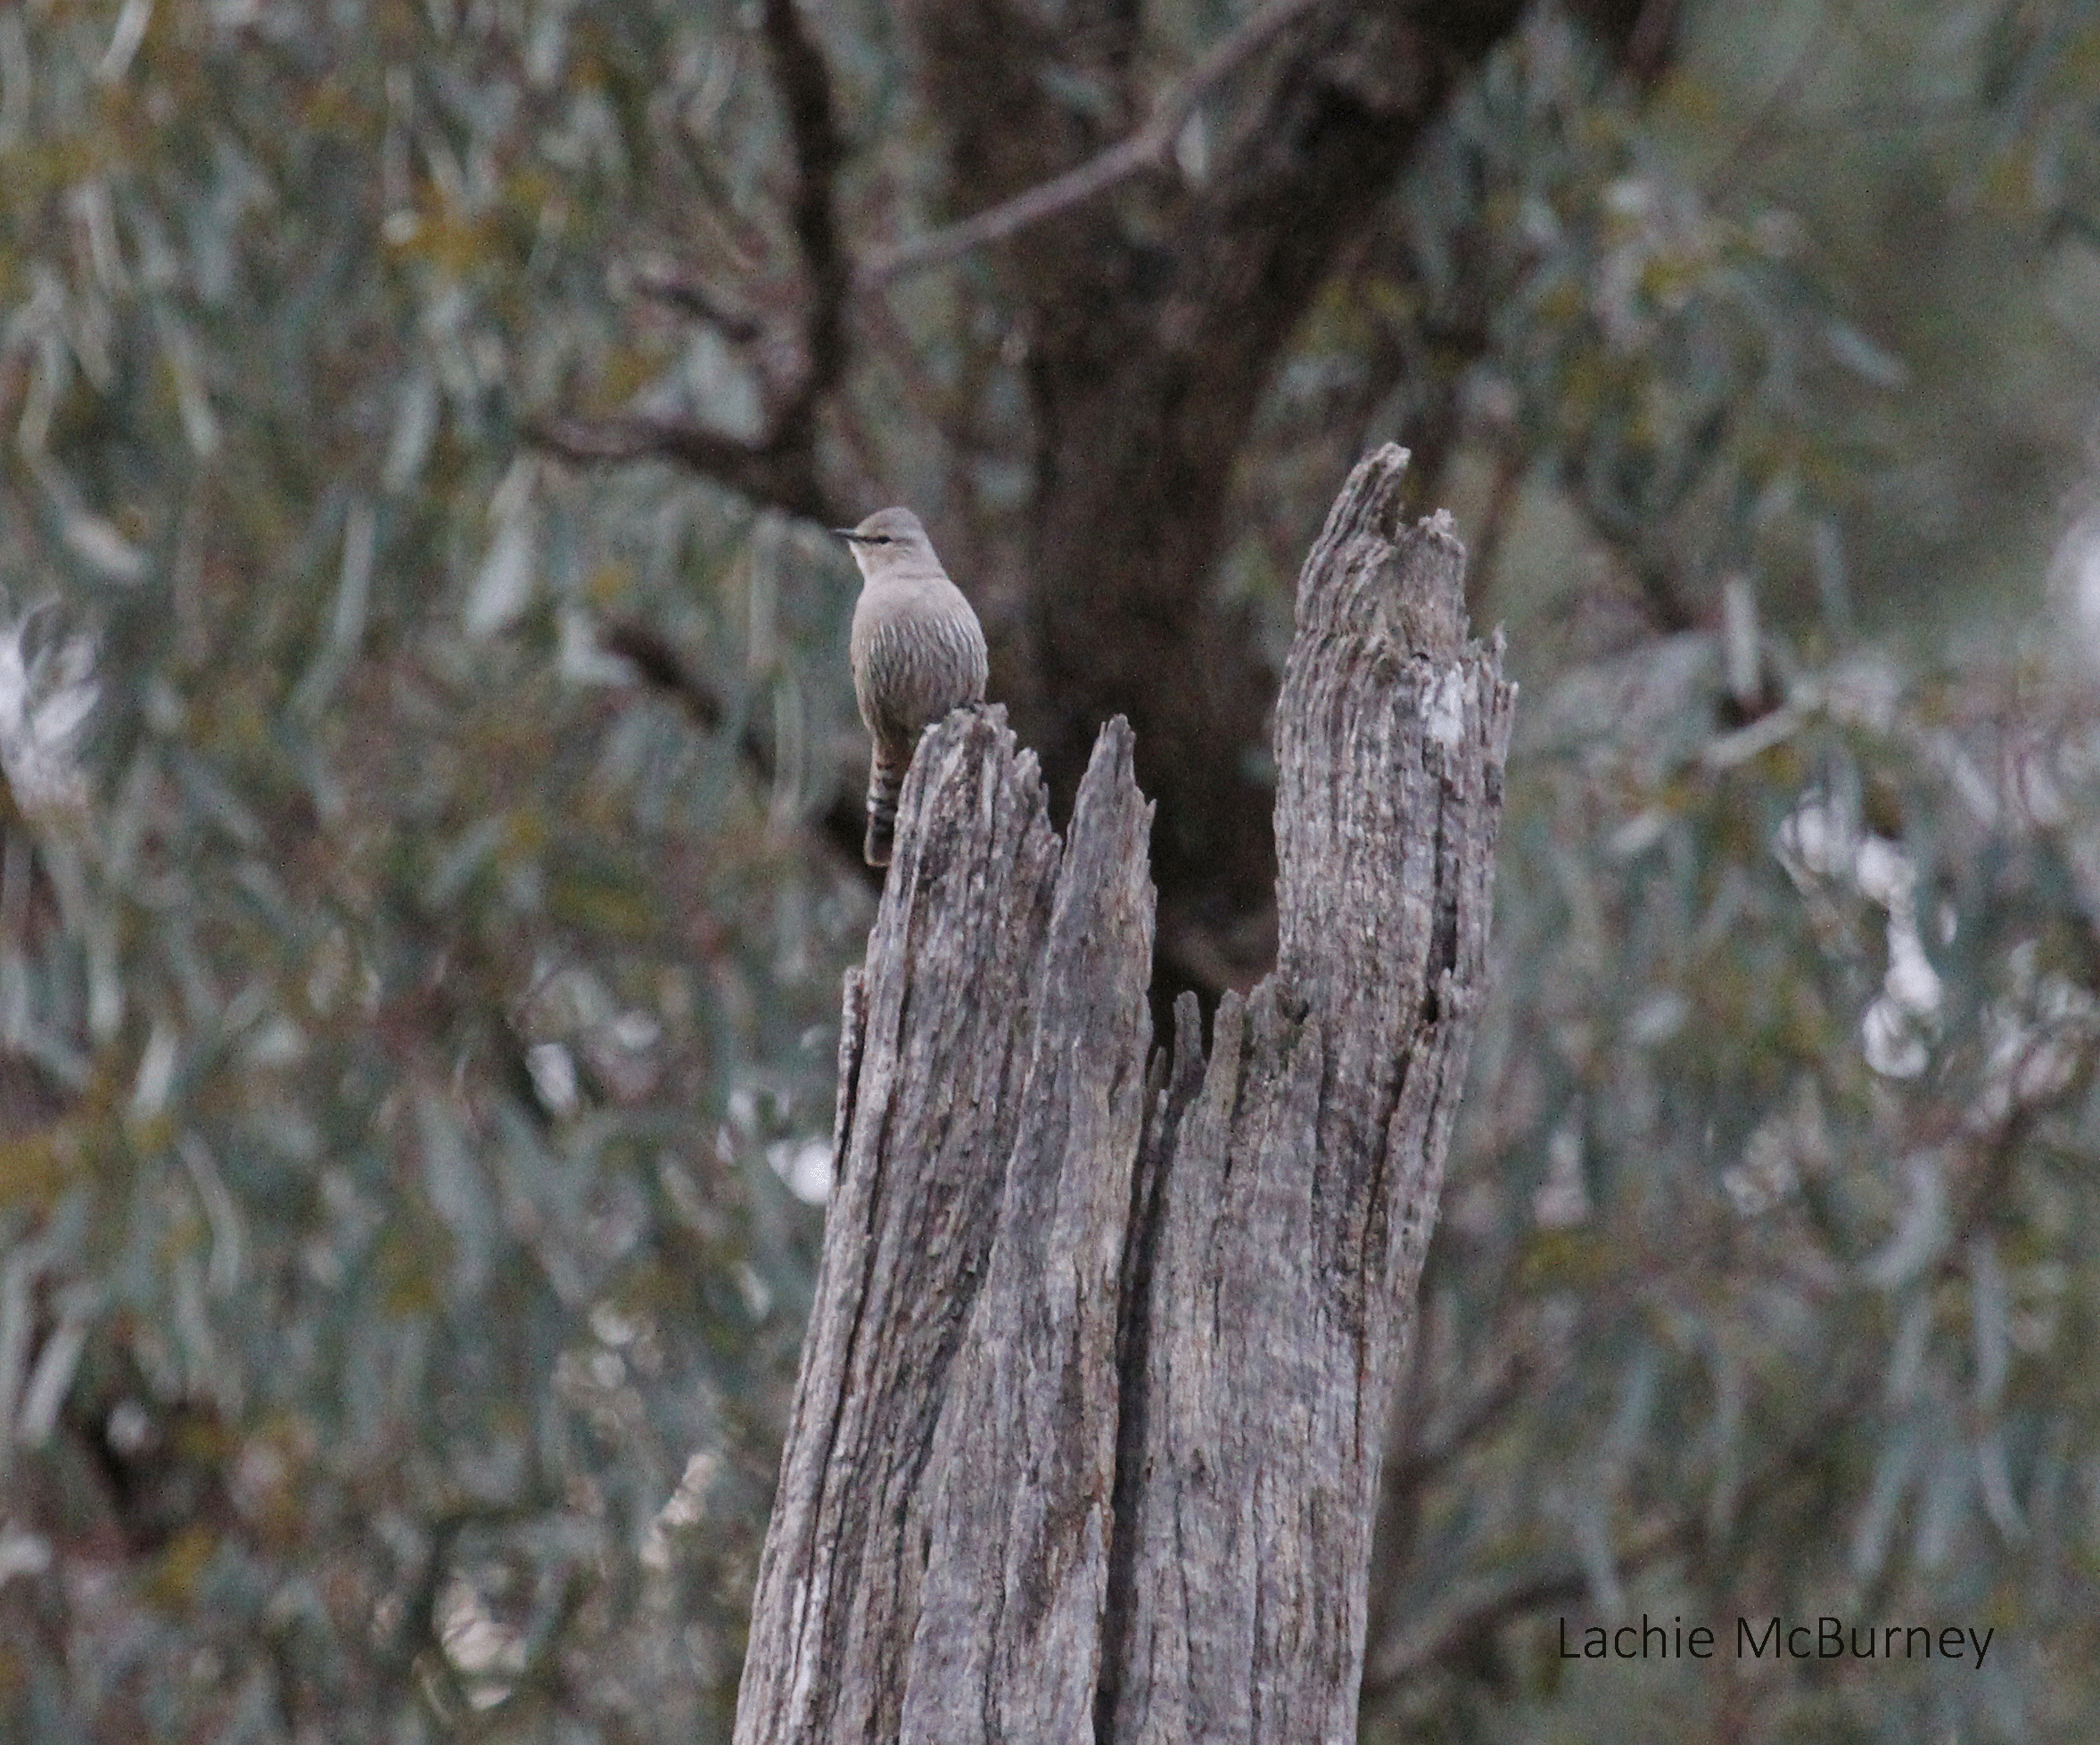   This Brown Treecreeper was hard to spot from a distance, but its loud “spink” call gave it away.     Photo: Lachie McBurney.  